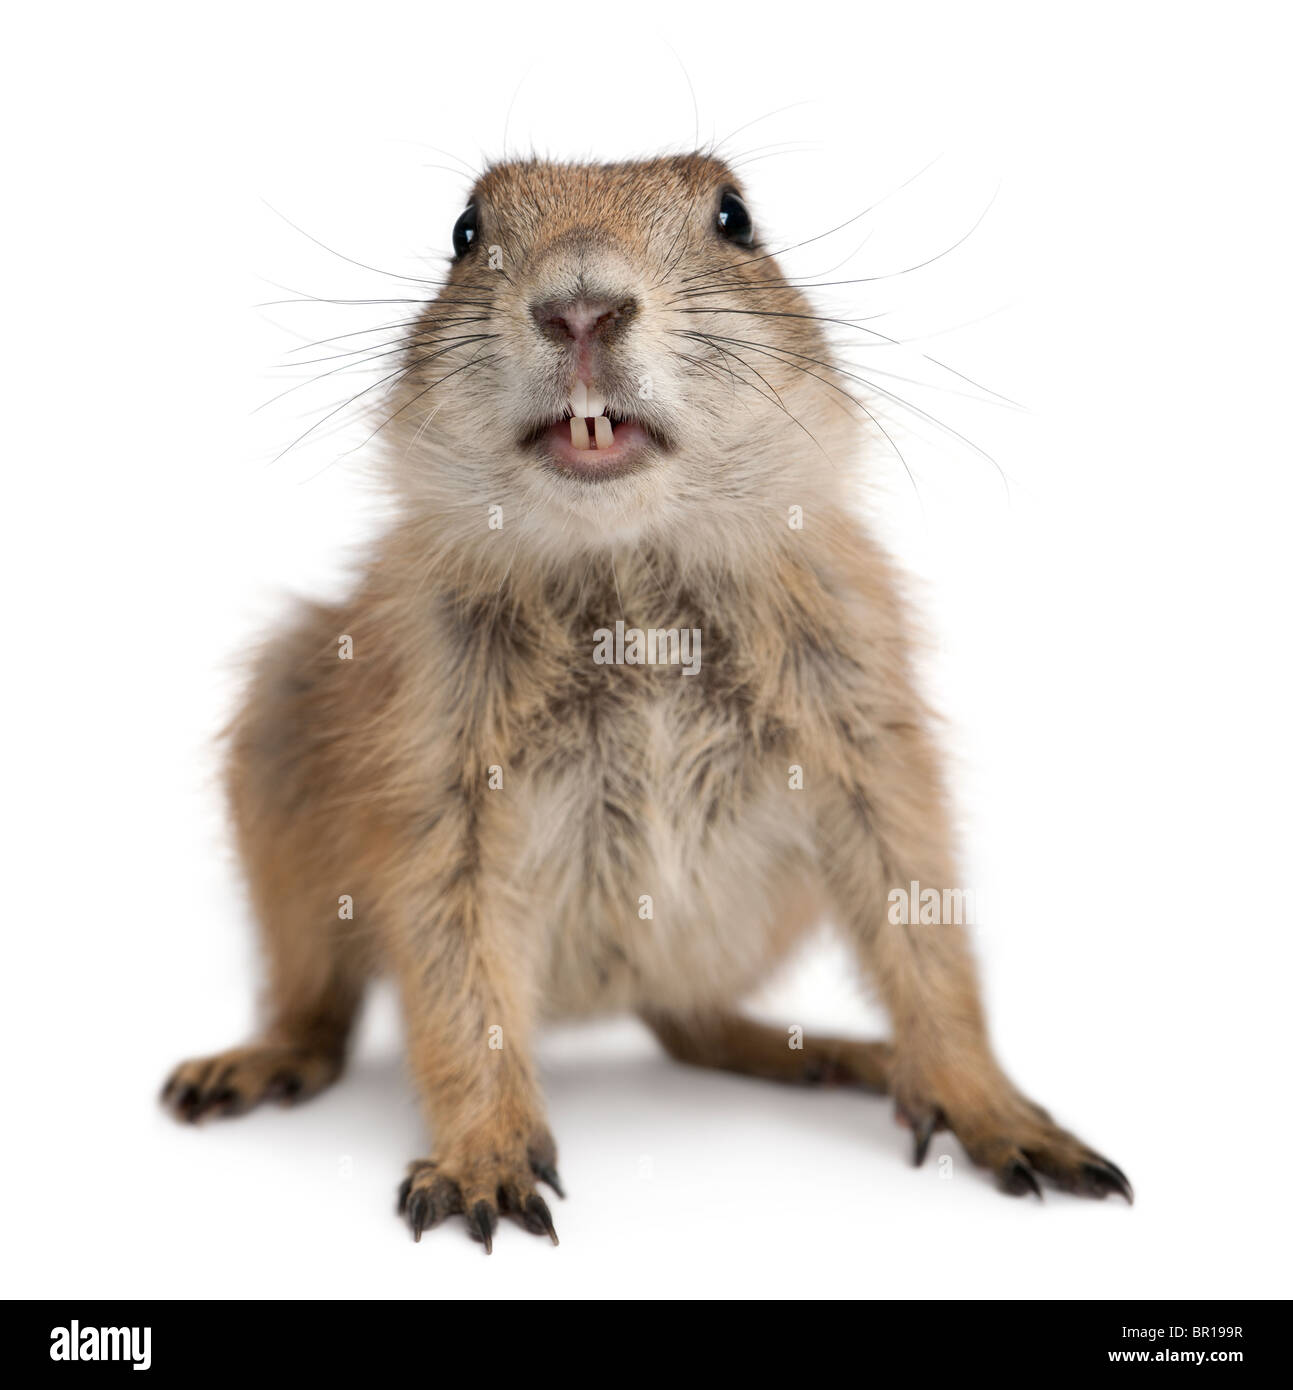 Black-tailed prairie dog, Cynomys ludovicianus, in front of white background Stock Photo